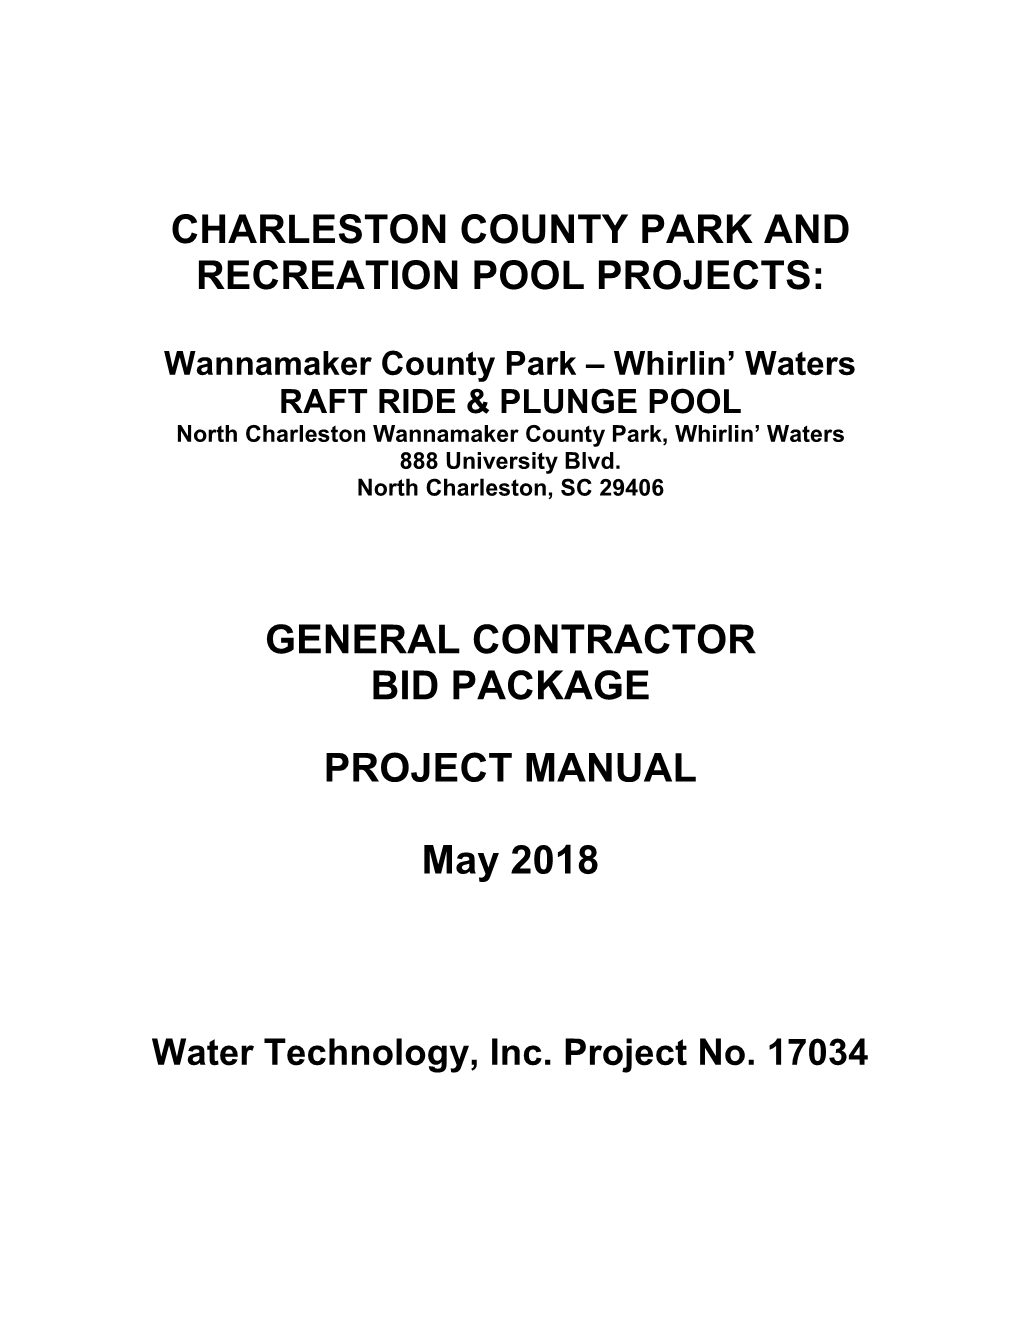 Charleston County Park and Recreation Pool Projects